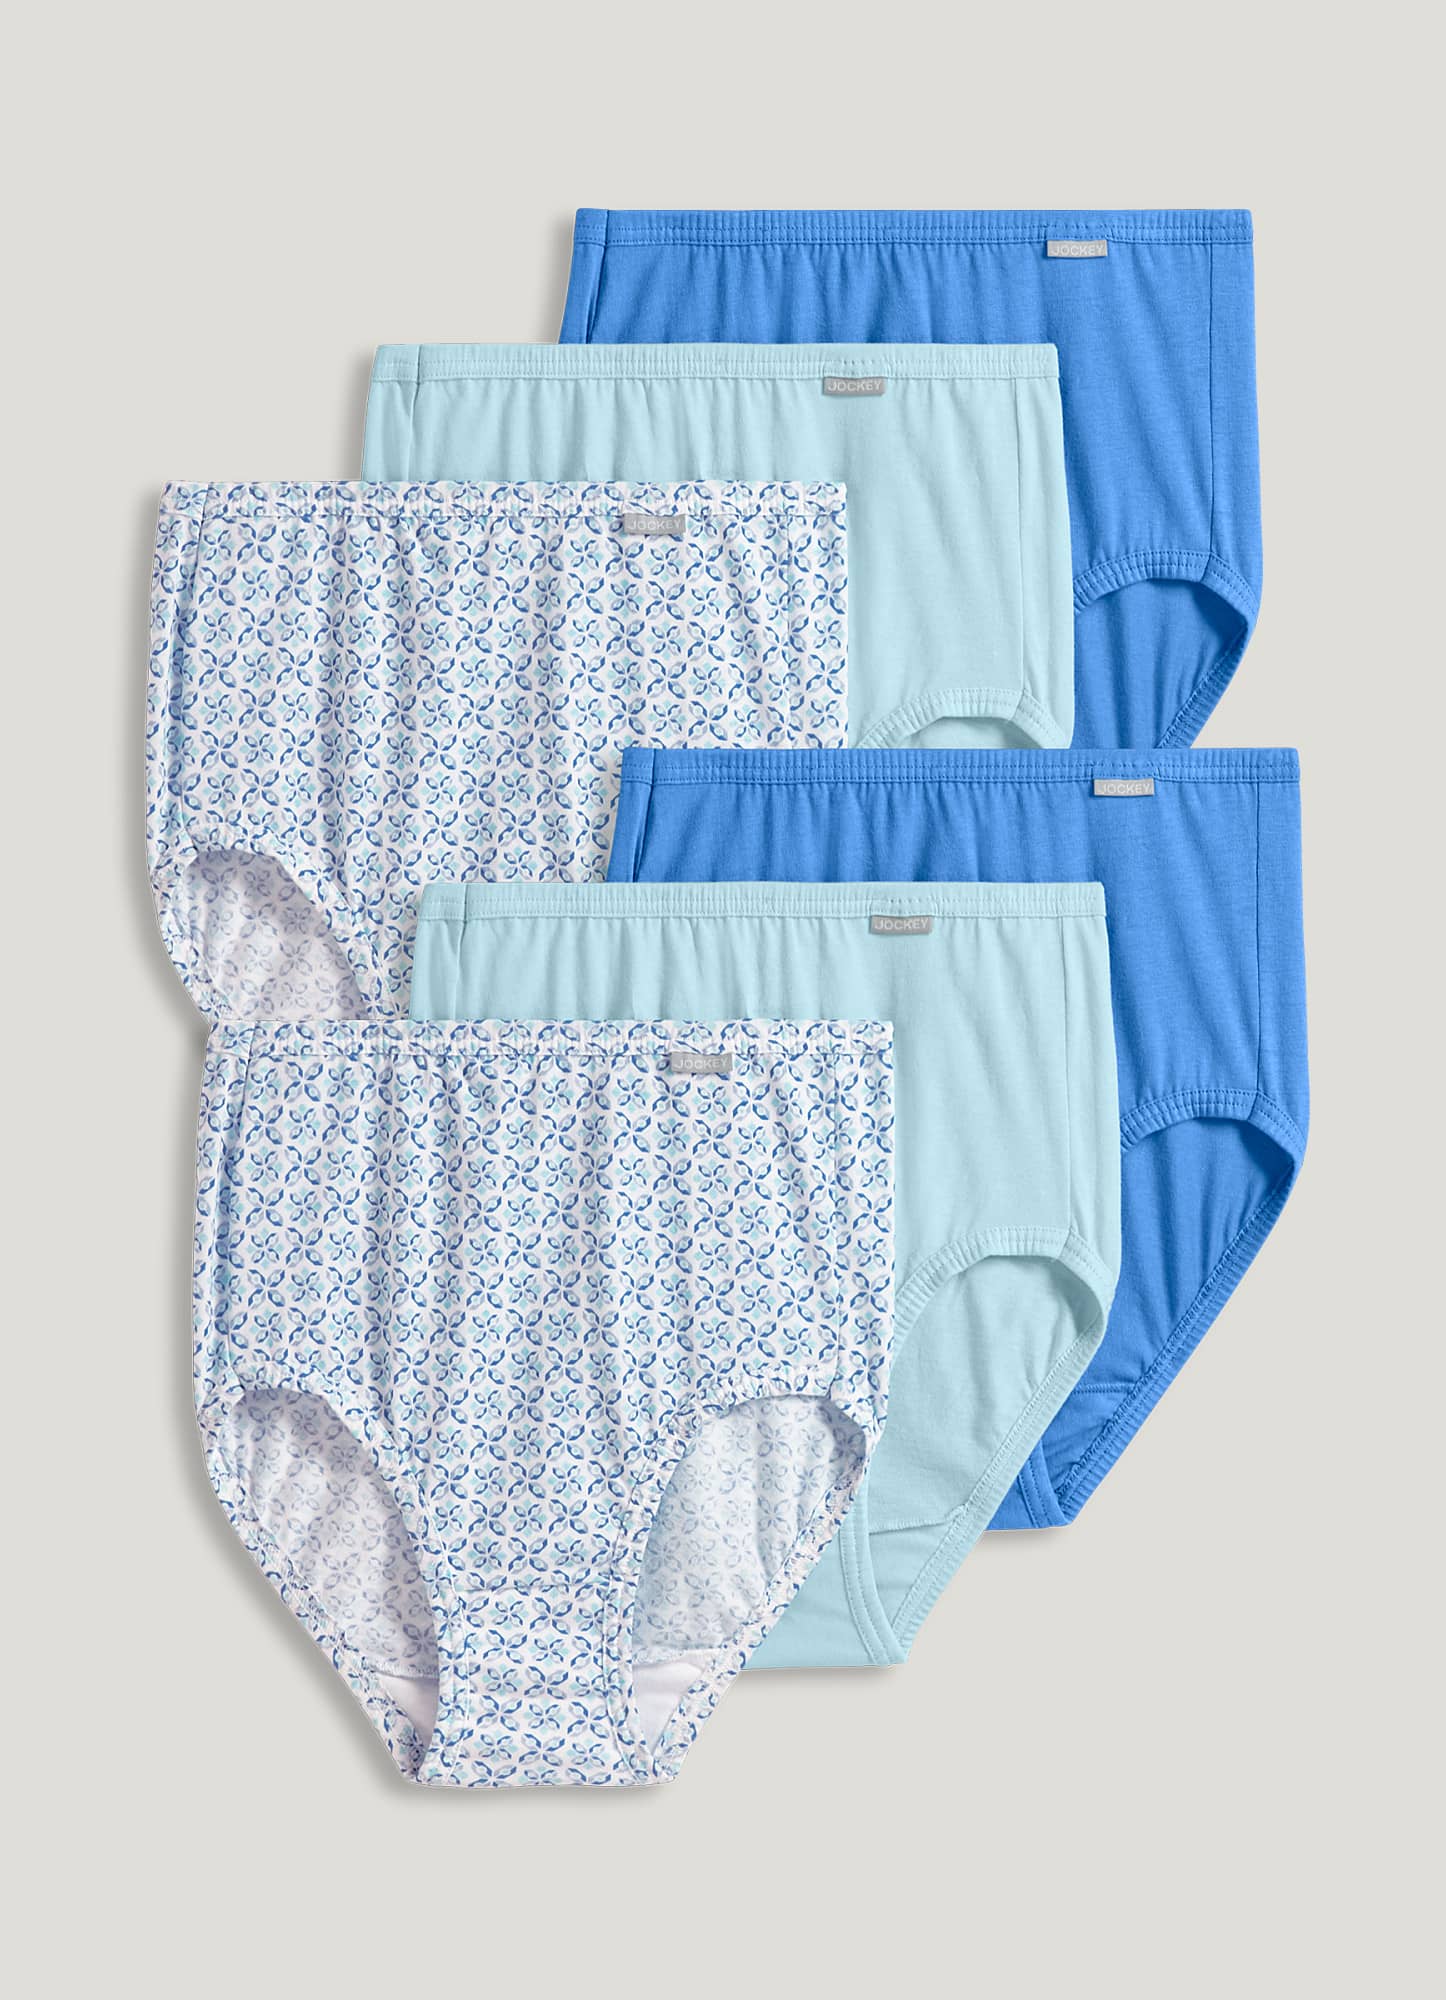 Jockey Girl's Cotton Printed Panty – Online Shopping site in India